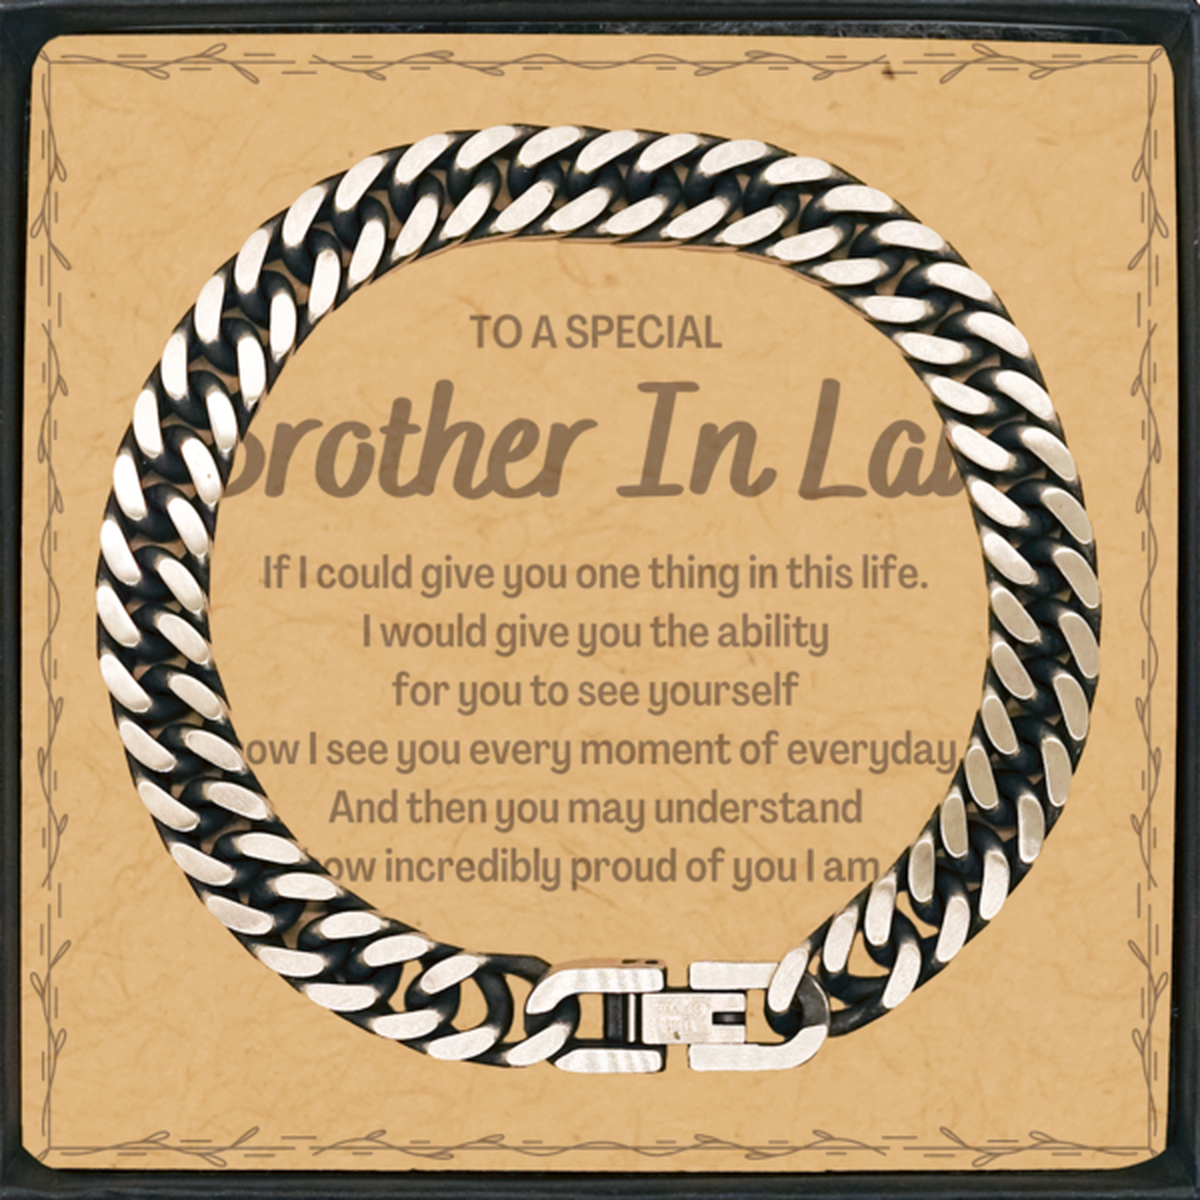 To My Brother In Law Cuban Link Chain Bracelet, Gifts For Brother In Law Message Card, Inspirational Gifts for Christmas Birthday, Epic Gifts for Brother In Law To A Special Brother In Law how incredibly proud of you I am